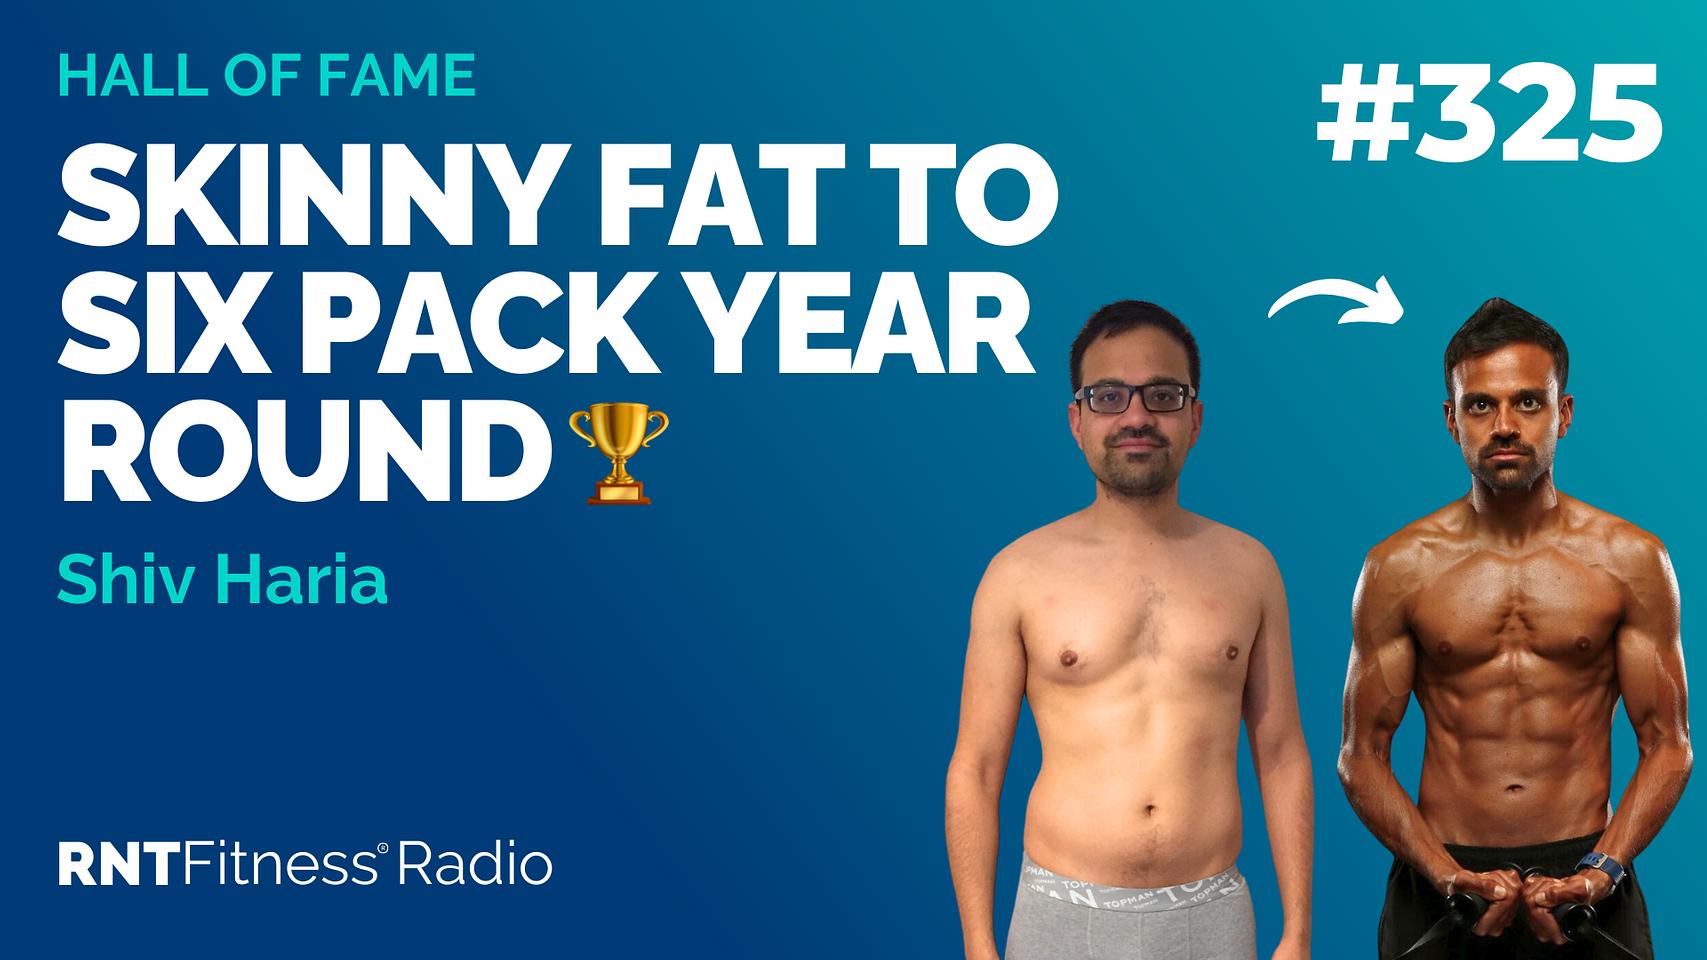 Ep 325 - Hall Of Fame | Shiv Haria: Skinny Fat To Six Pack Year Round! 🏆